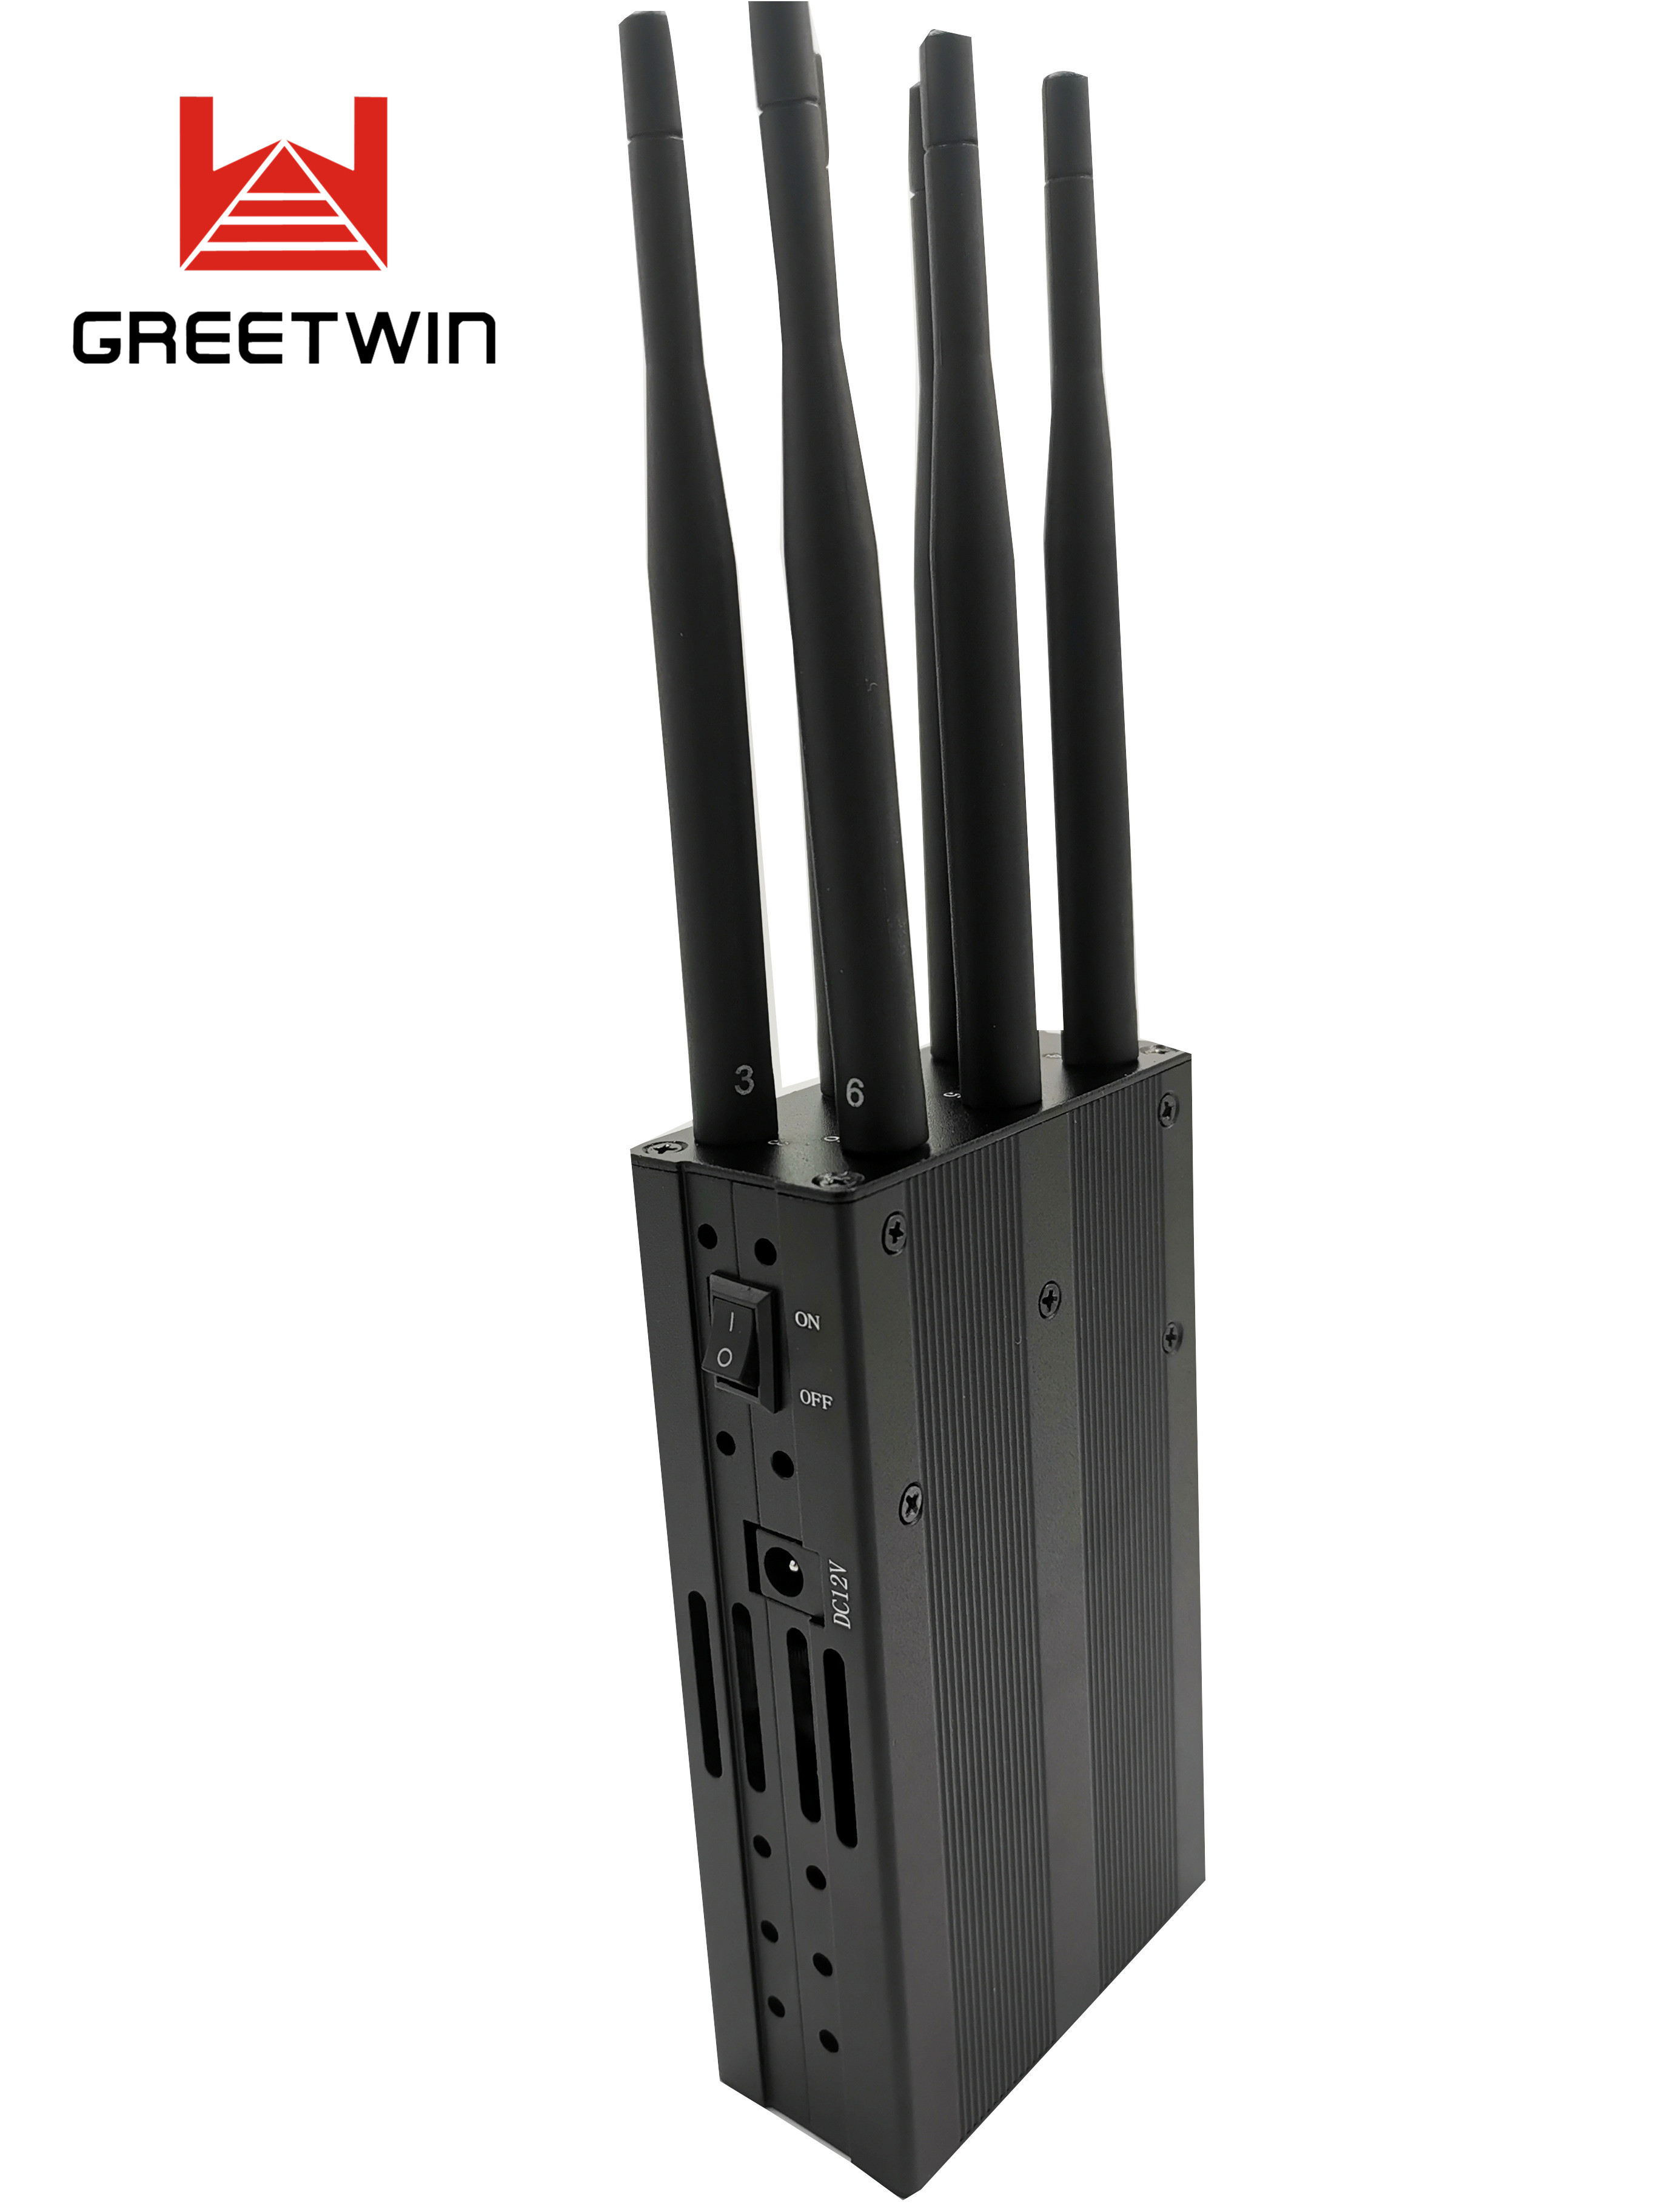 LTE 700MHz LTE2300MHz LTE2600MHz 6 Band Portable 3G 4G Cell Phone Signal Jammer